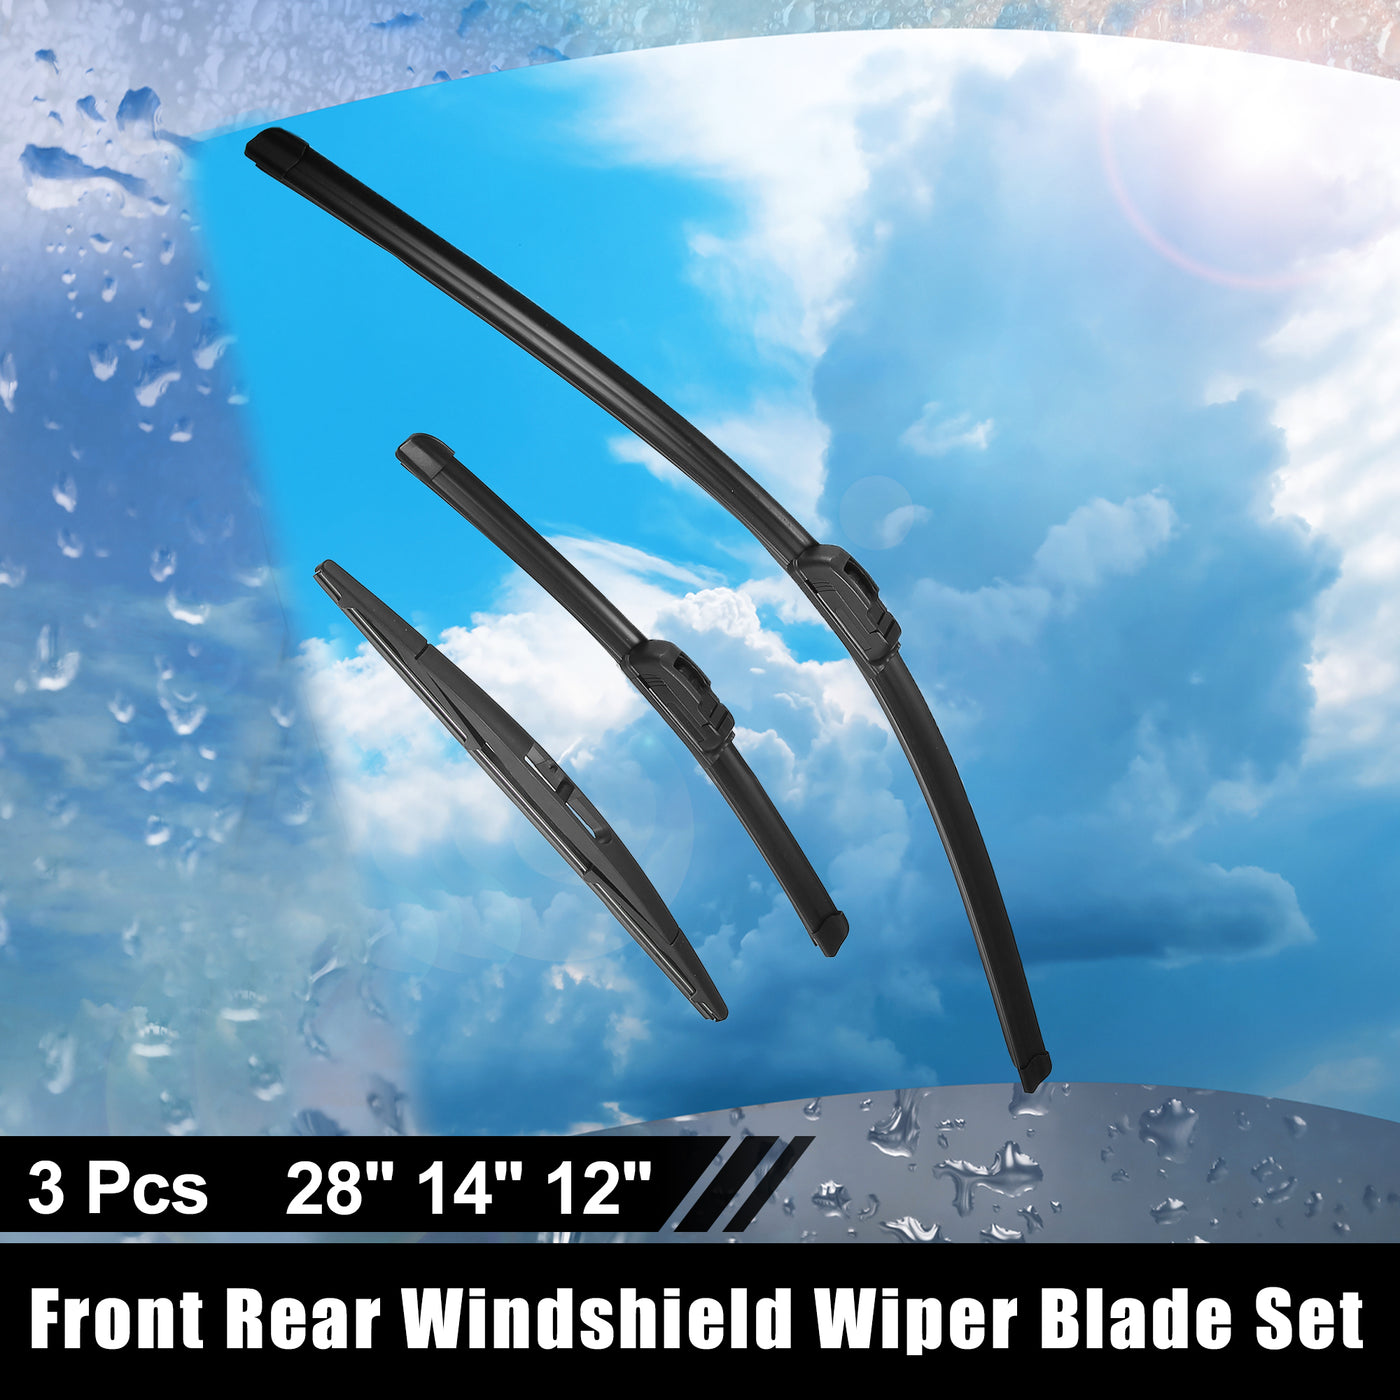 ACROPIX 28" 14" 12" Front Rear Windshield Wiper Blade Set Fit for Nissan Versa Note - Pack of 3 Black